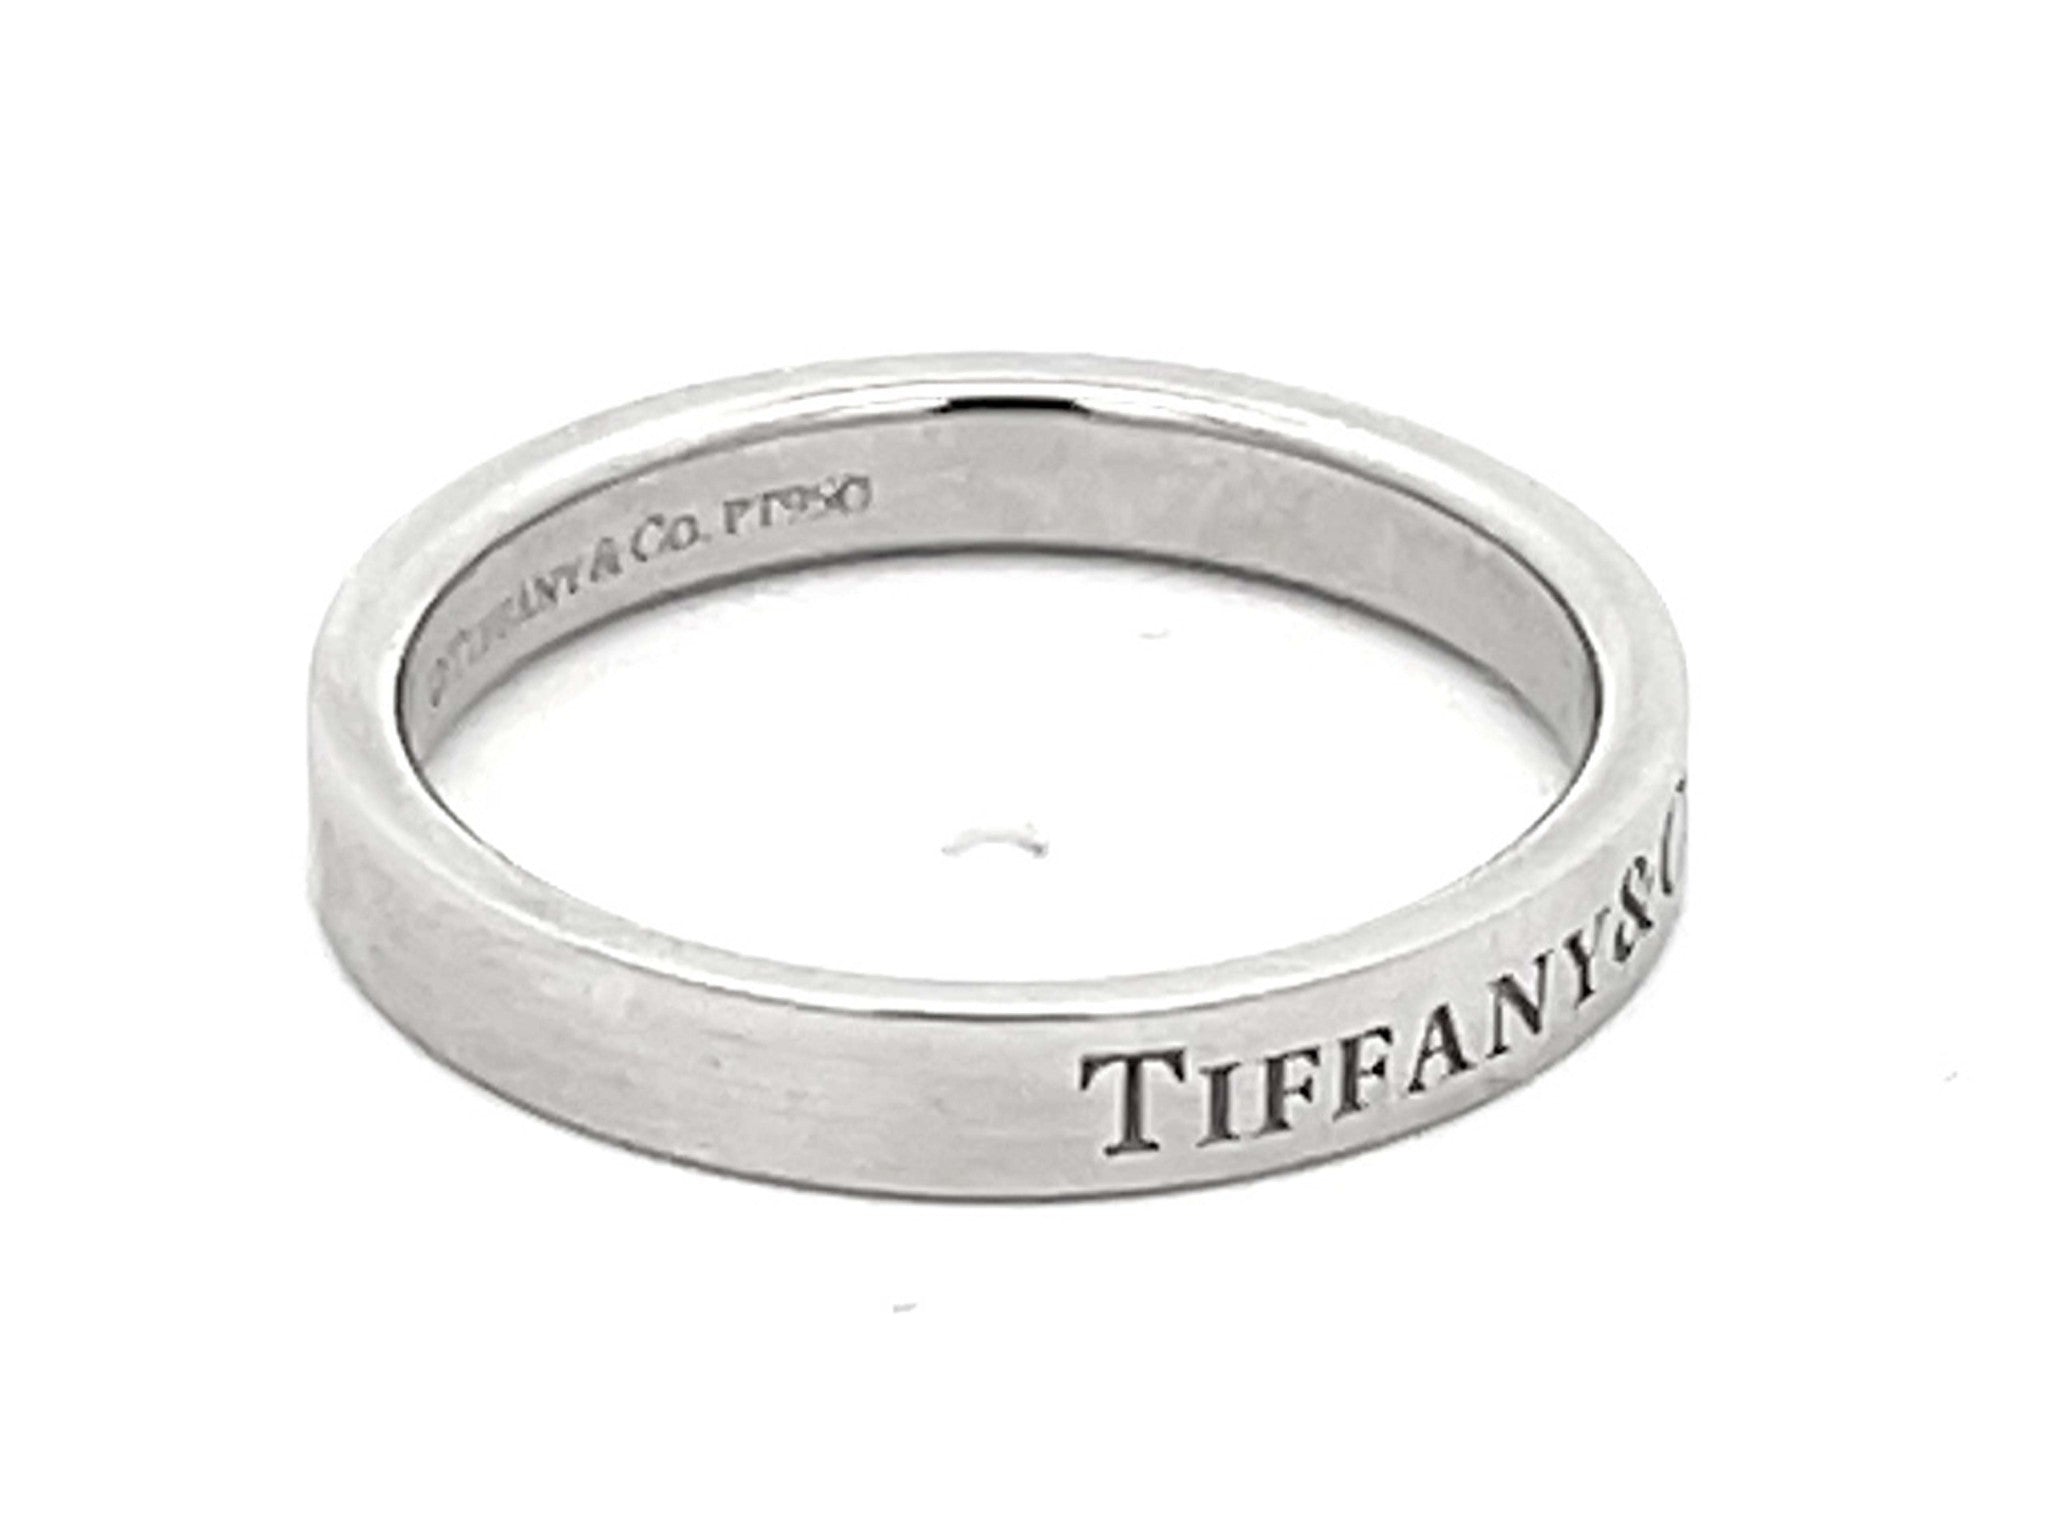 Tiffany & Co. Wedding Band in Platinum 3 mm Wide